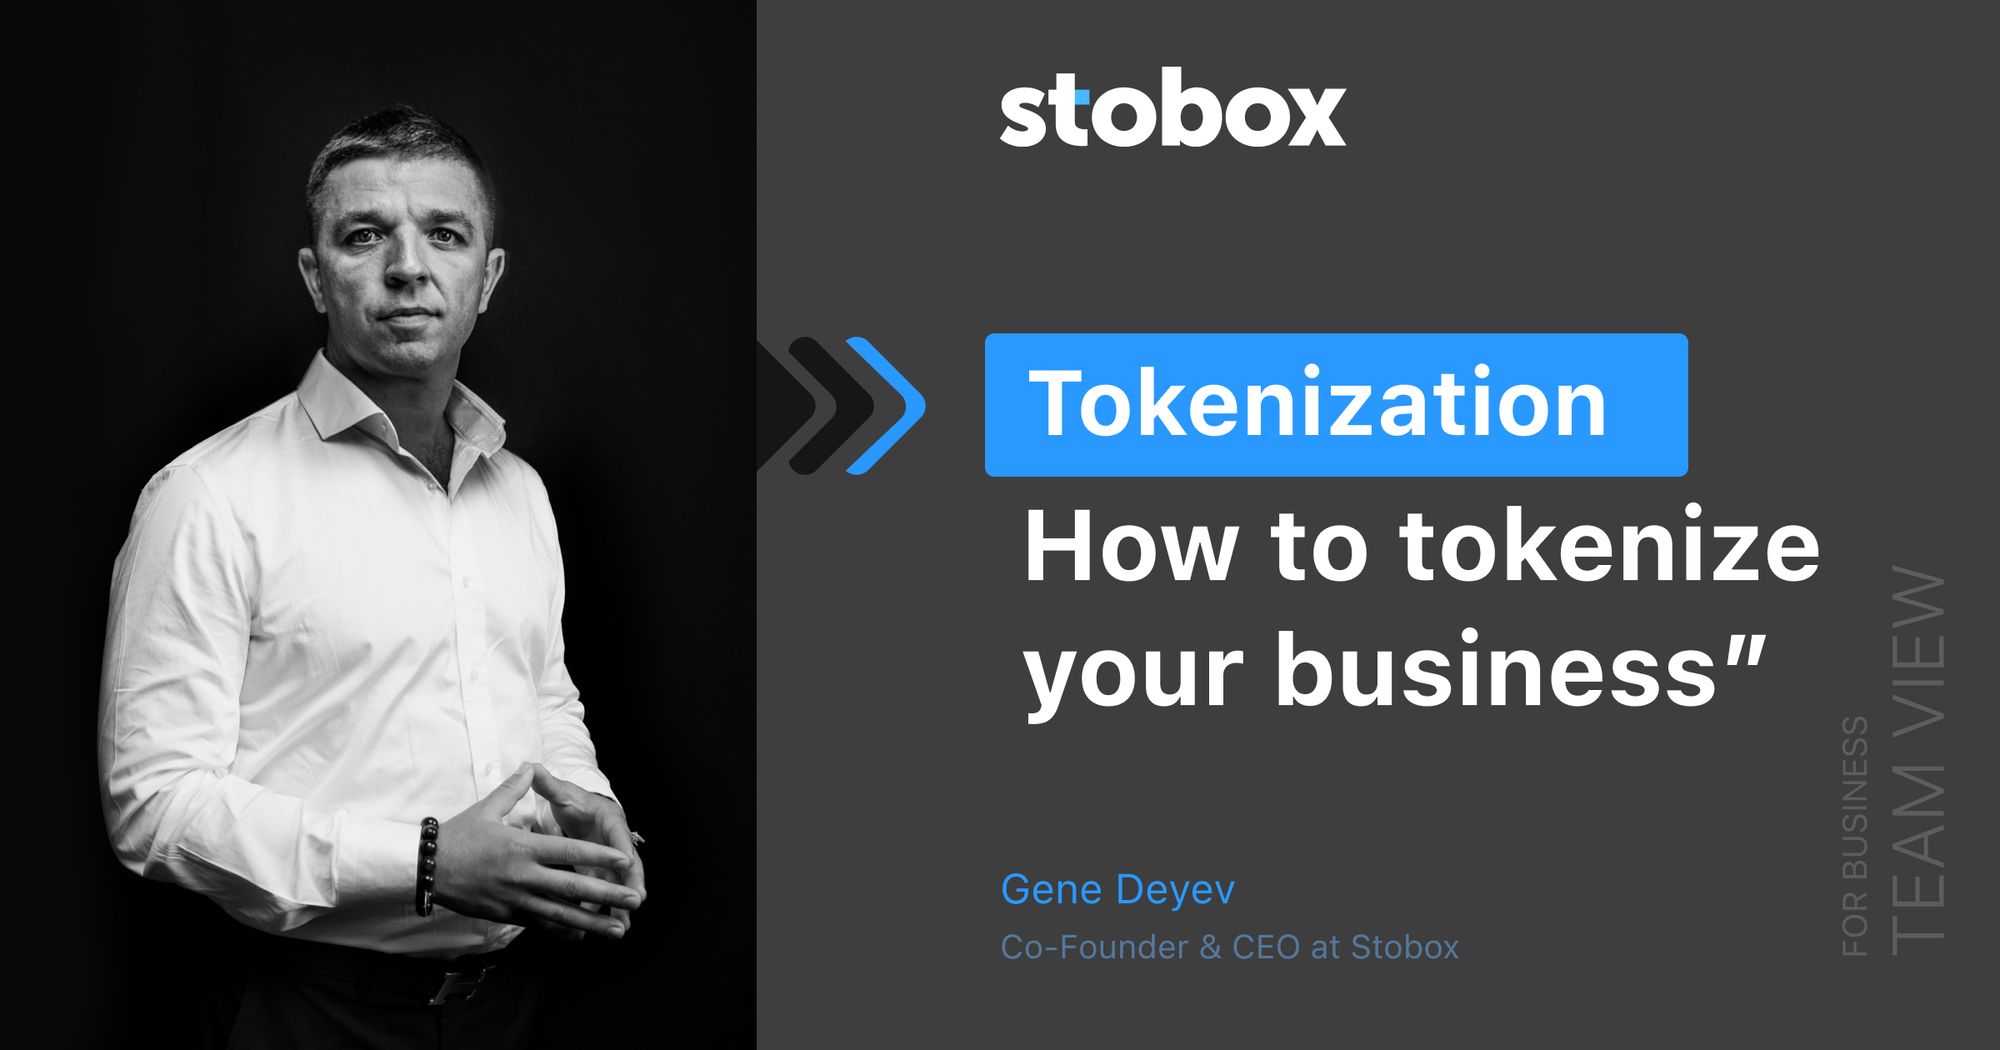 How to tokenize your business and use digital assets